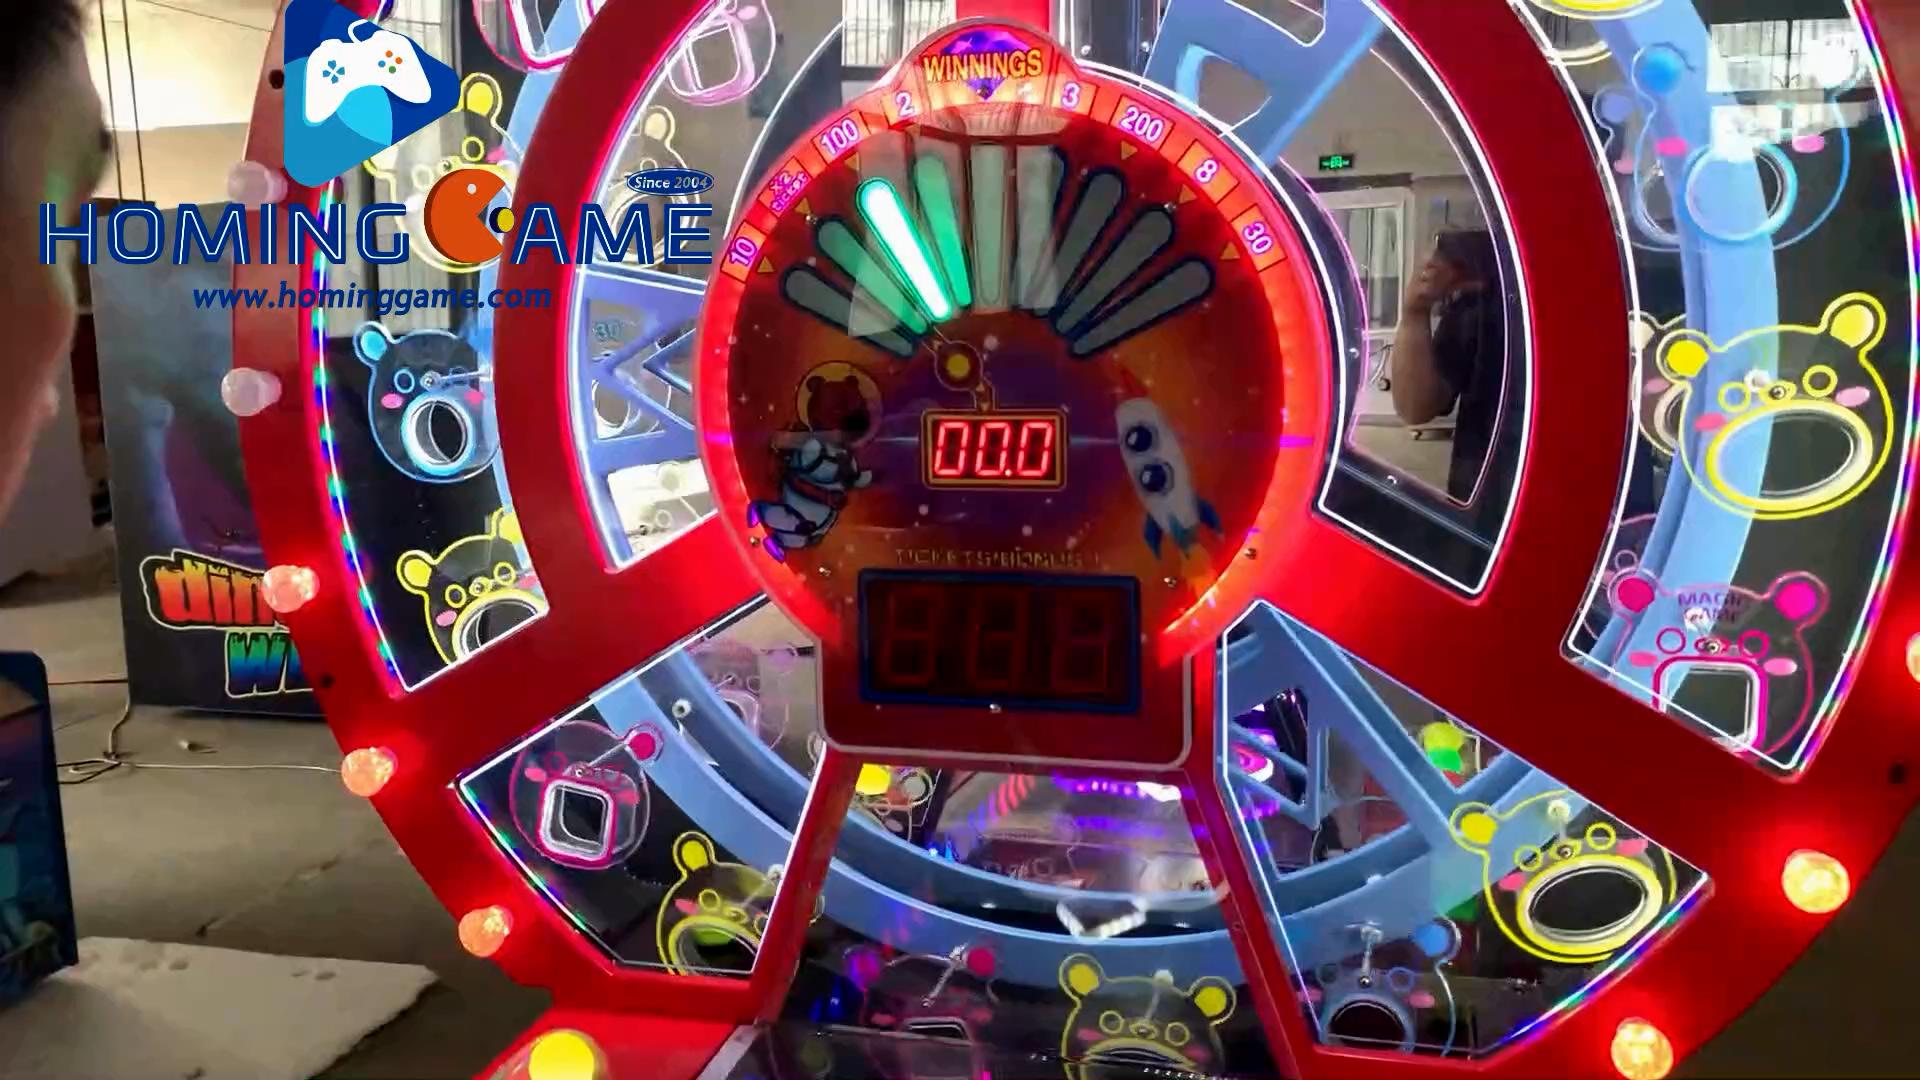 2020 HomingGame Newest Funny Luck Bear Wheel Skill shooting ball lottery redemption arcade game machine(Order Call whatsapp:+8618688409495)|Lottery Game Machine|Redemption Game Machine|Shooting Ball Arcade Game Machine|Game Machine|Arcade Game Machine|Coin Operated Game Machine|Amusement Park Game Equipment|Indoor Game Machine|Kids Game Machine|Children Arcade Game Machine|Family entertainment Game|Kids Game Equipment|Children Game Machine|Fec Game Machine|coin operated Redemption Game Machine'>
	<meta name='twitter:description' content='Specialize in Manufacturing and Supplying lottery game,lottery game machine,lucky bear shooting ball arcade game machine,lucky bear,lucky bear wheel redemption game machine,lucky bear wheel shooting ball lottery redemption game machine,game machine,arcade game machine,coin operated game machine,kids game machine,kids game,kids redemption game machine,children redemption game machine,kids arcade game machine,kids game equipment,amusement park game equipment,amusement machine,games,entertainment game machine,family entertainment game machine,indoor game machine,electrical game machine,FEC game center game machine,hominggame,www.gametube.hk,amusement equipment,skill game machine,skill redemption game machine,coin operated redemption game machine,coin operated lottery game machine